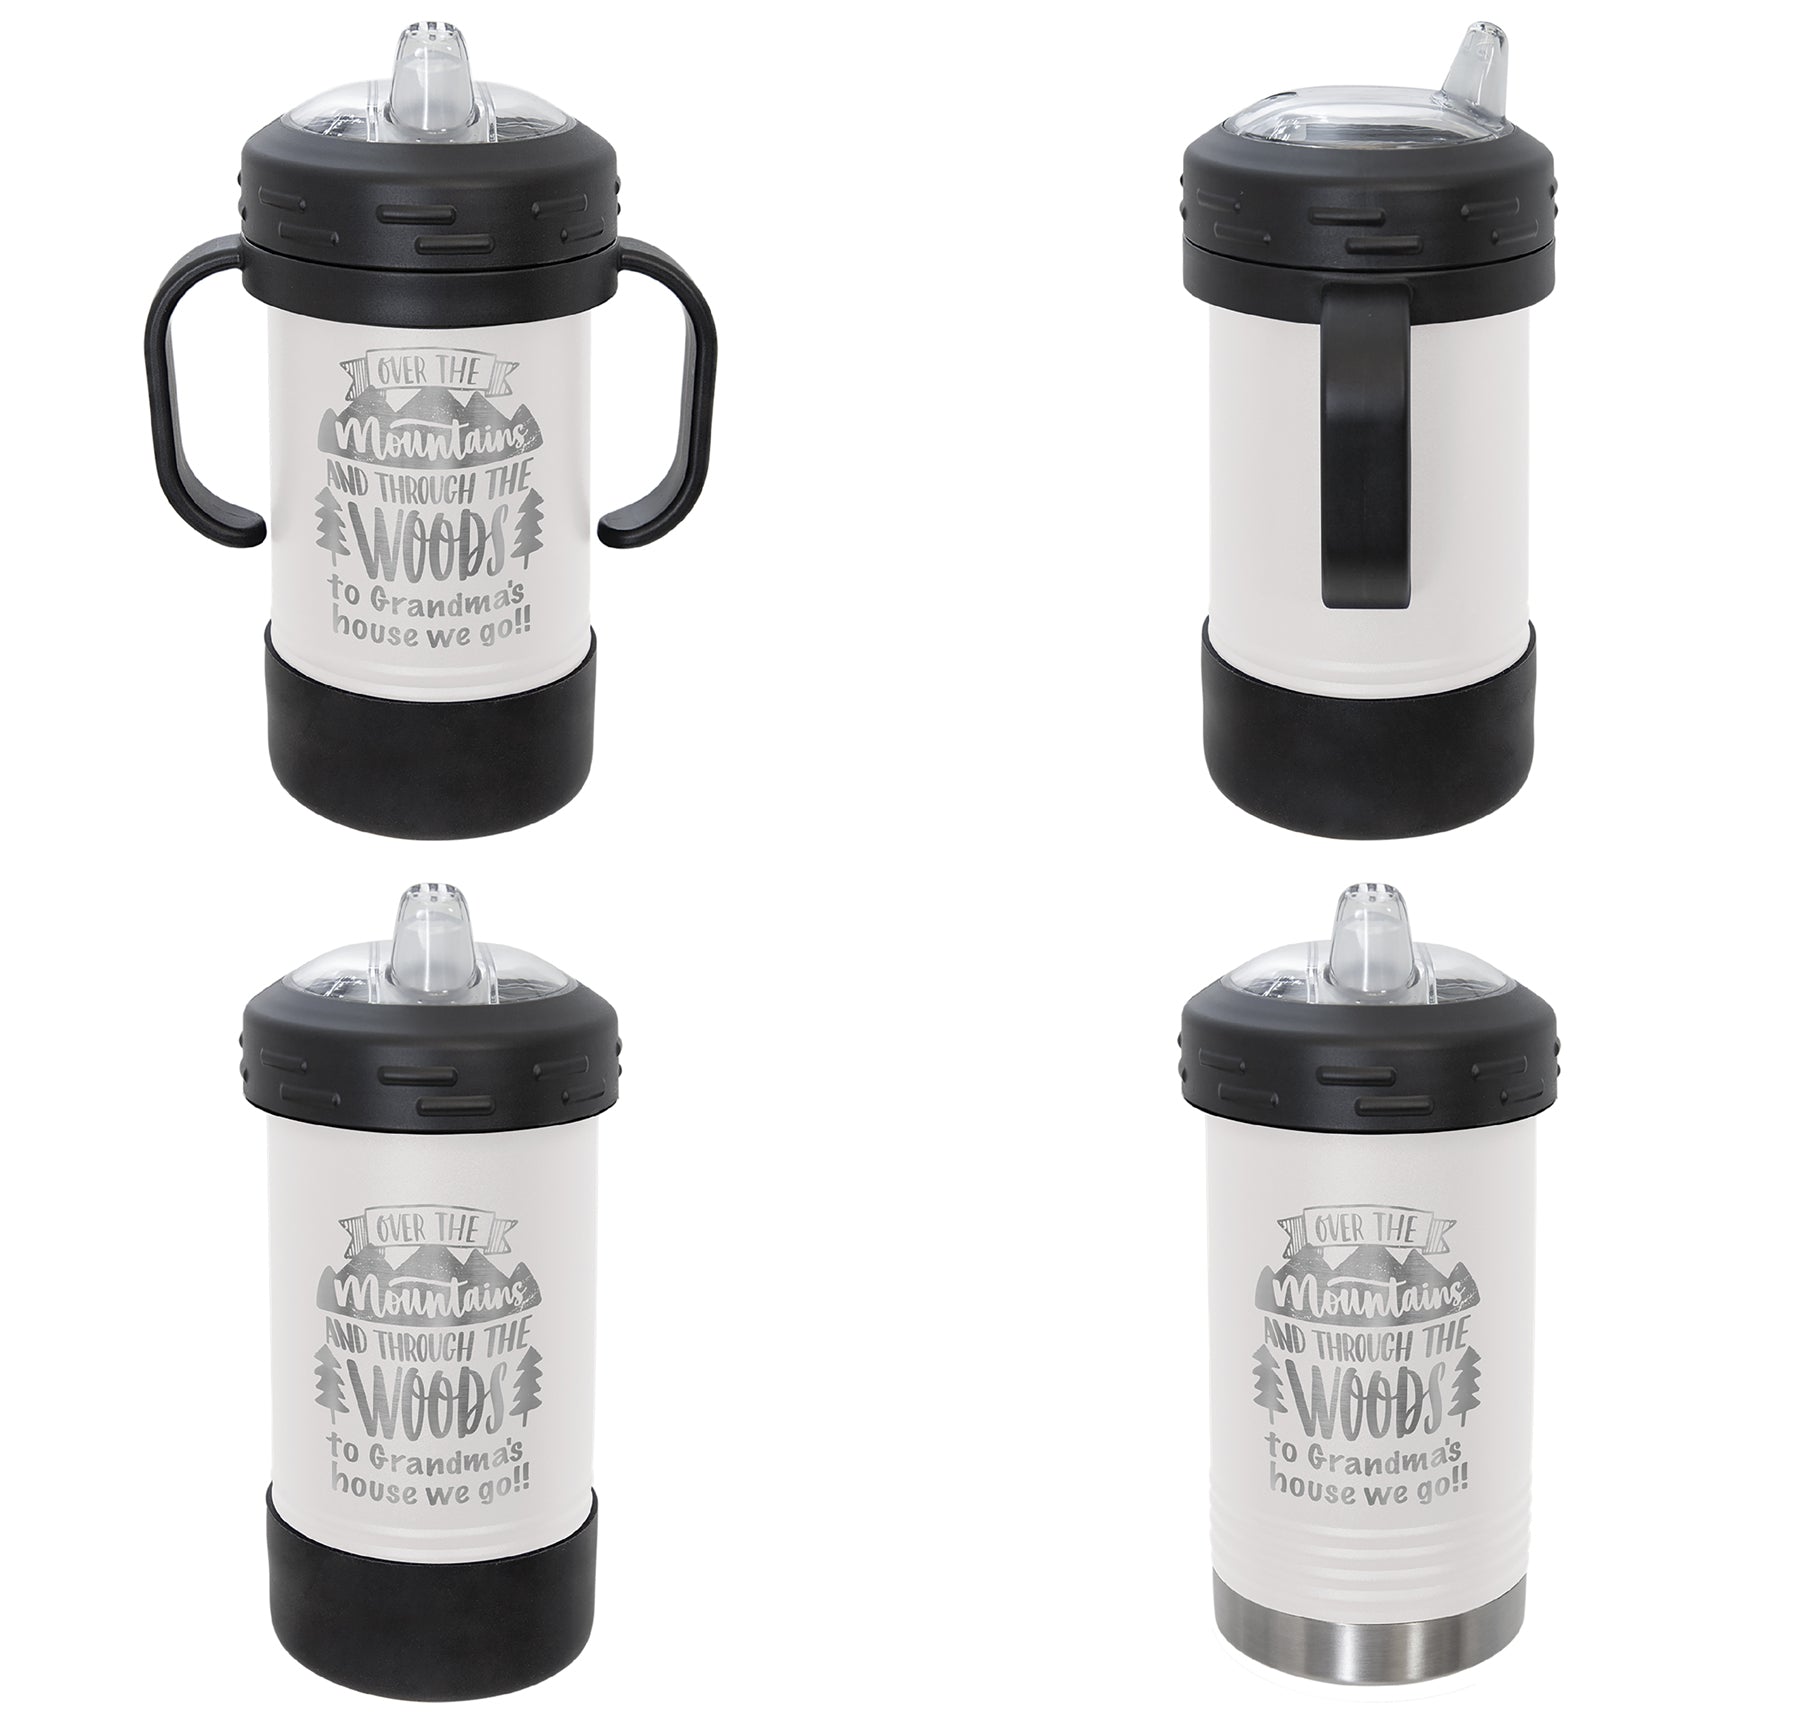 Elk and Friends Stainless Steel Cups, Mason Jar 10oz